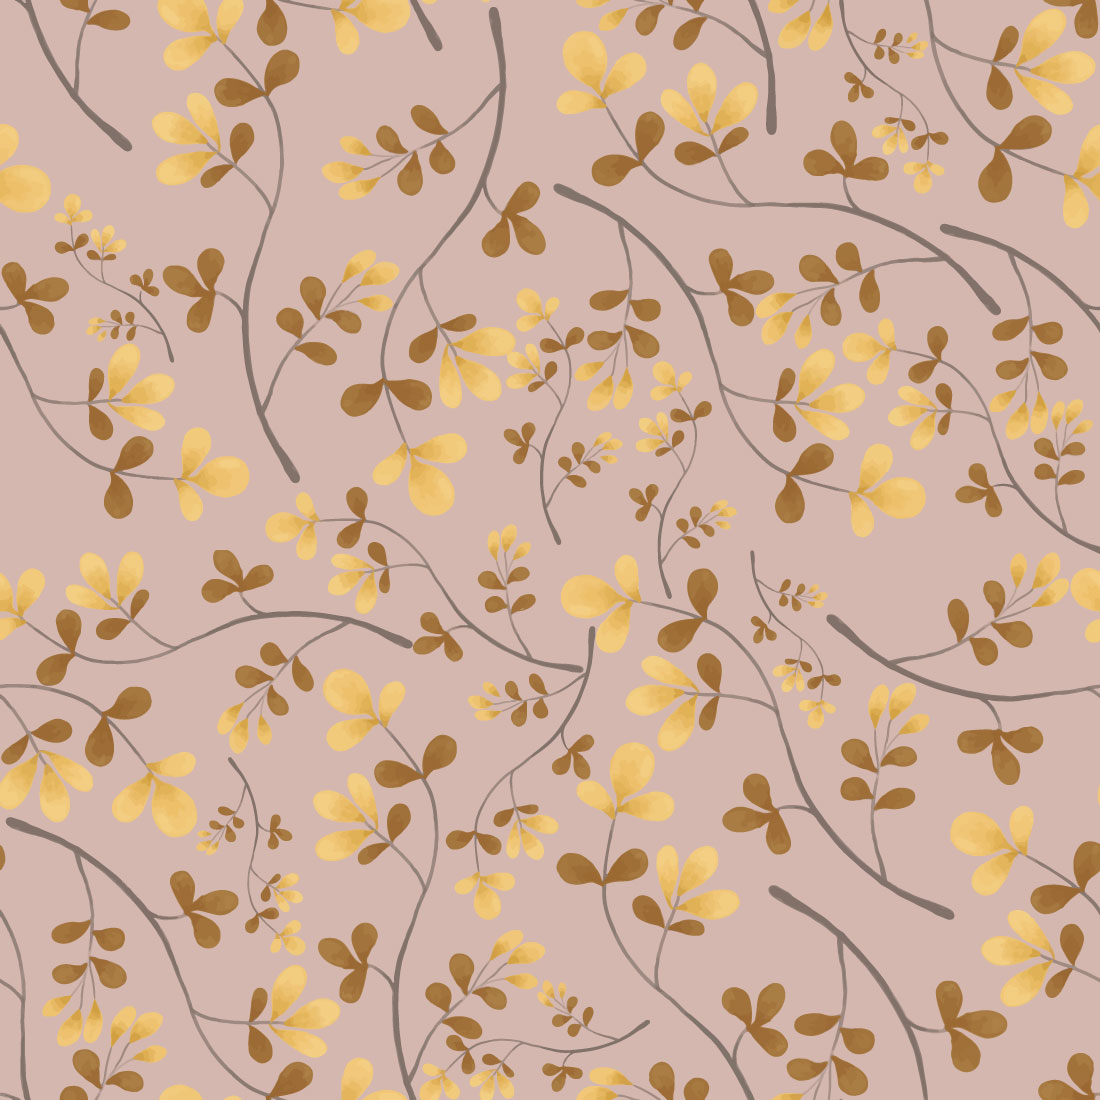 Leaf Autumn Seamless Pattern preview image.